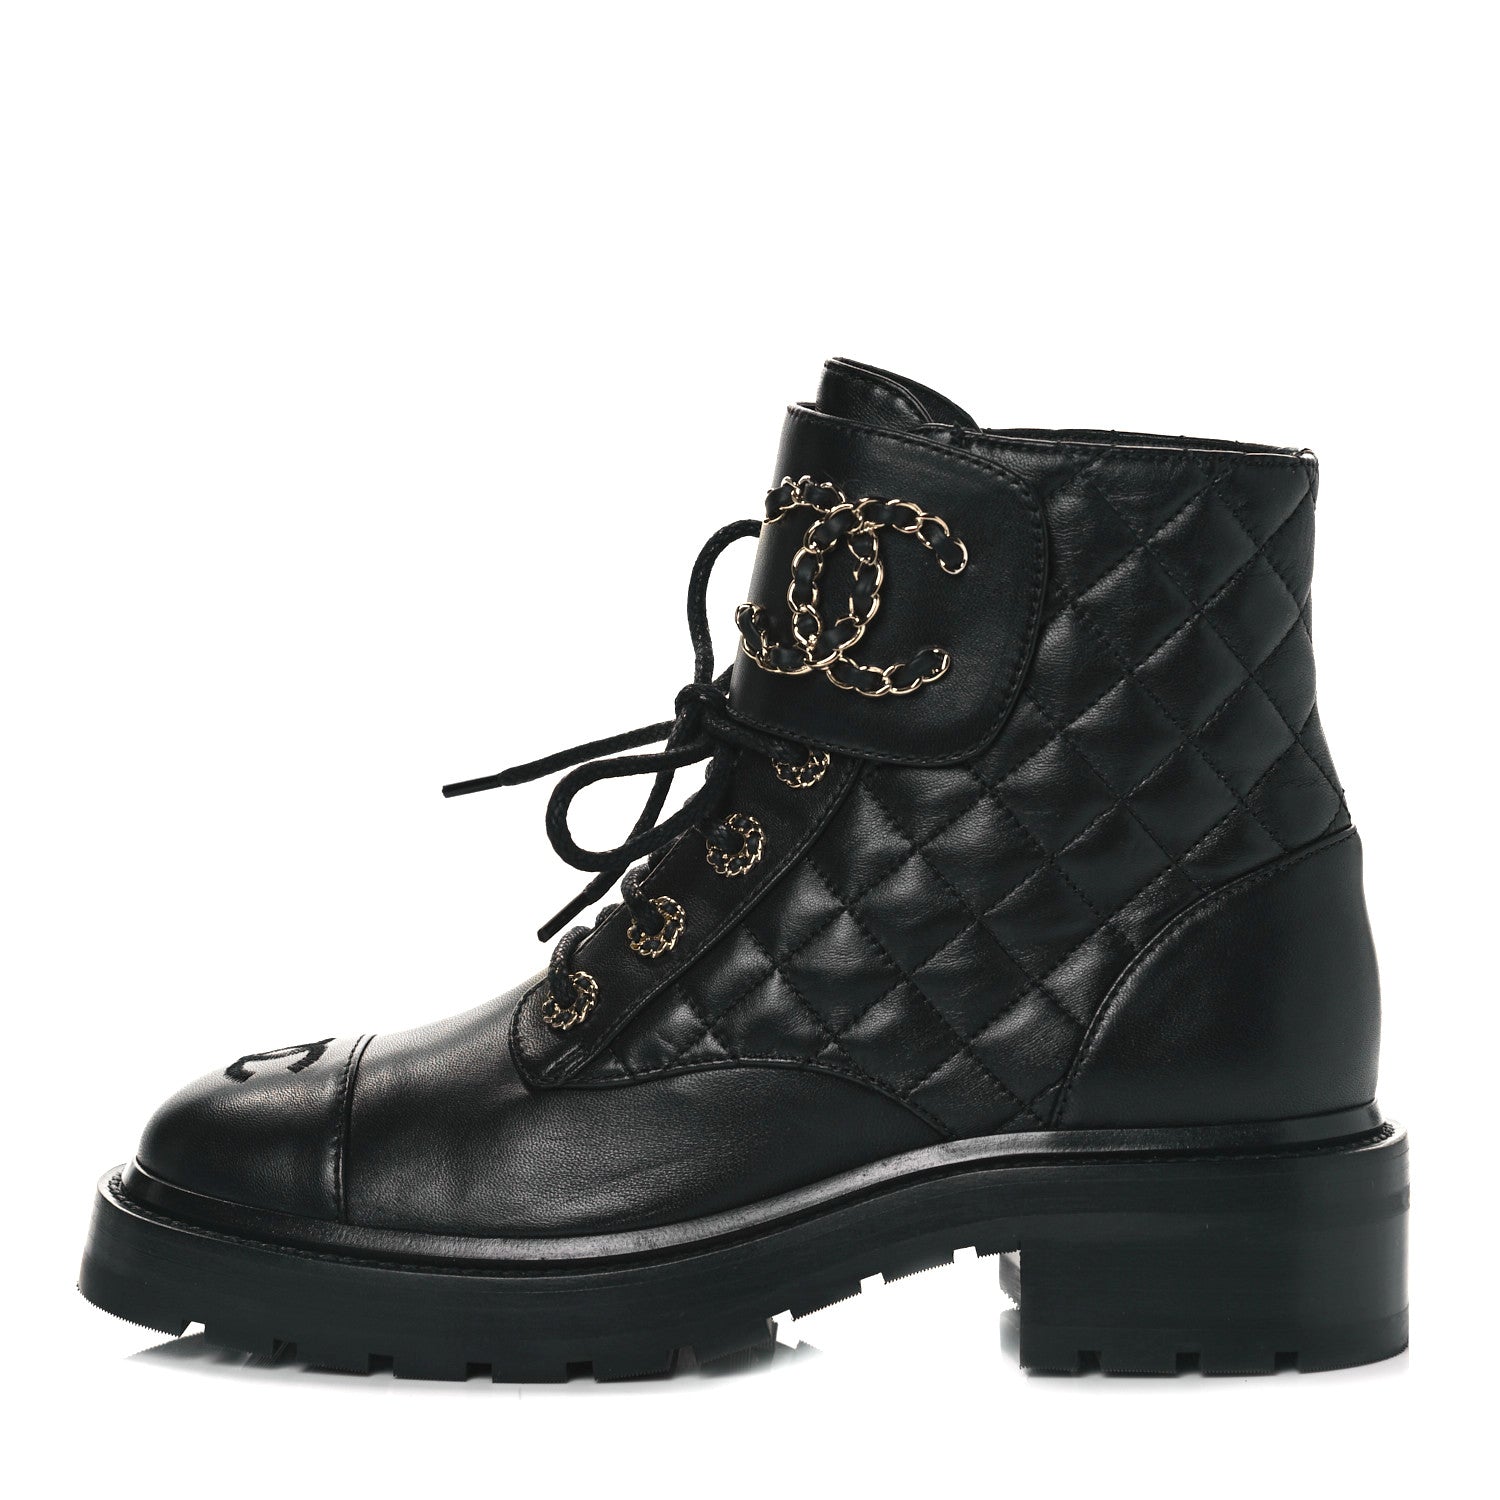 CHANEL QUILTED LAMBSKIN COMBAT BOOTS